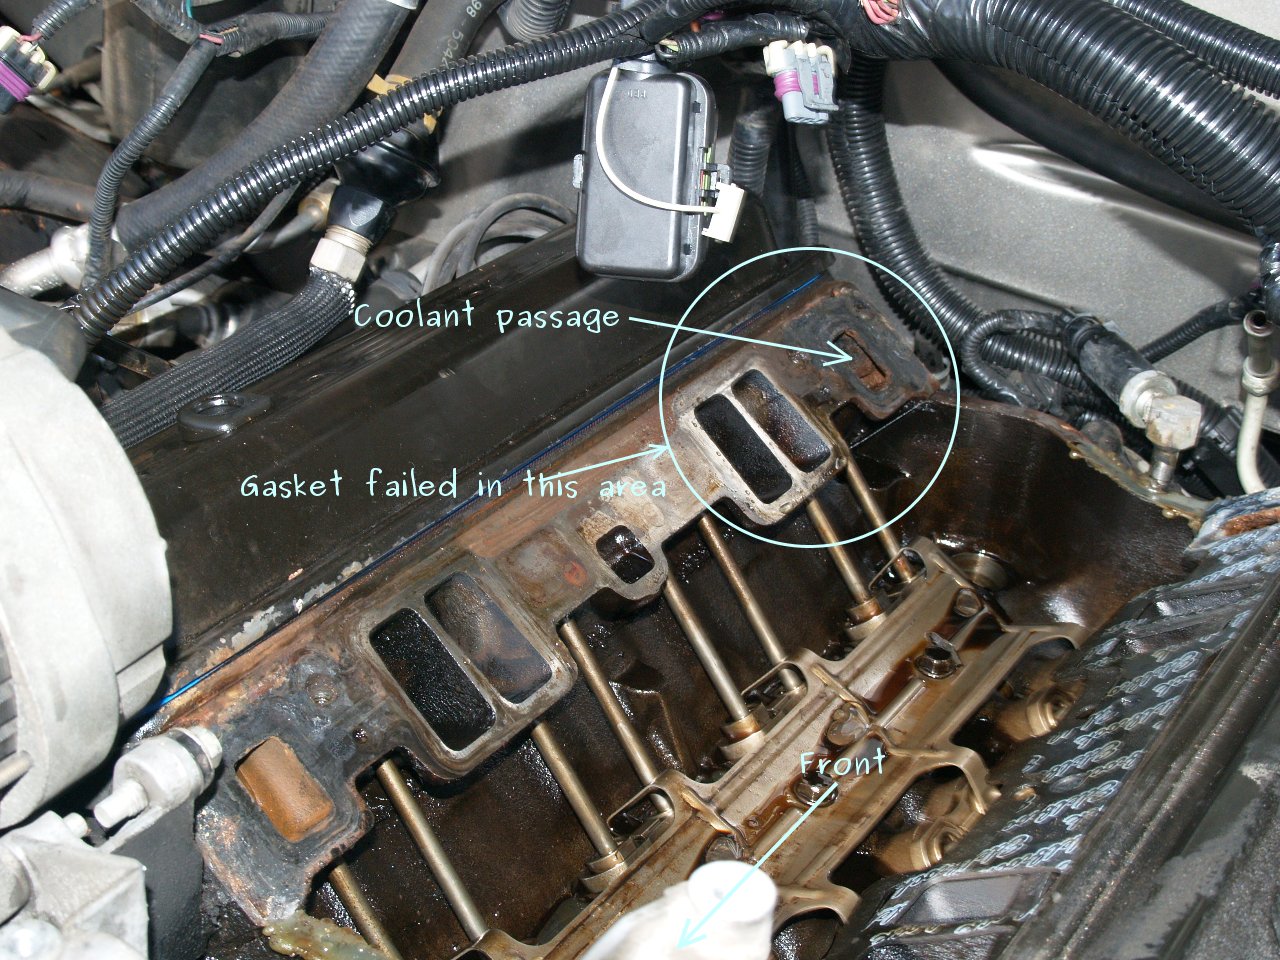 See P0469 in engine